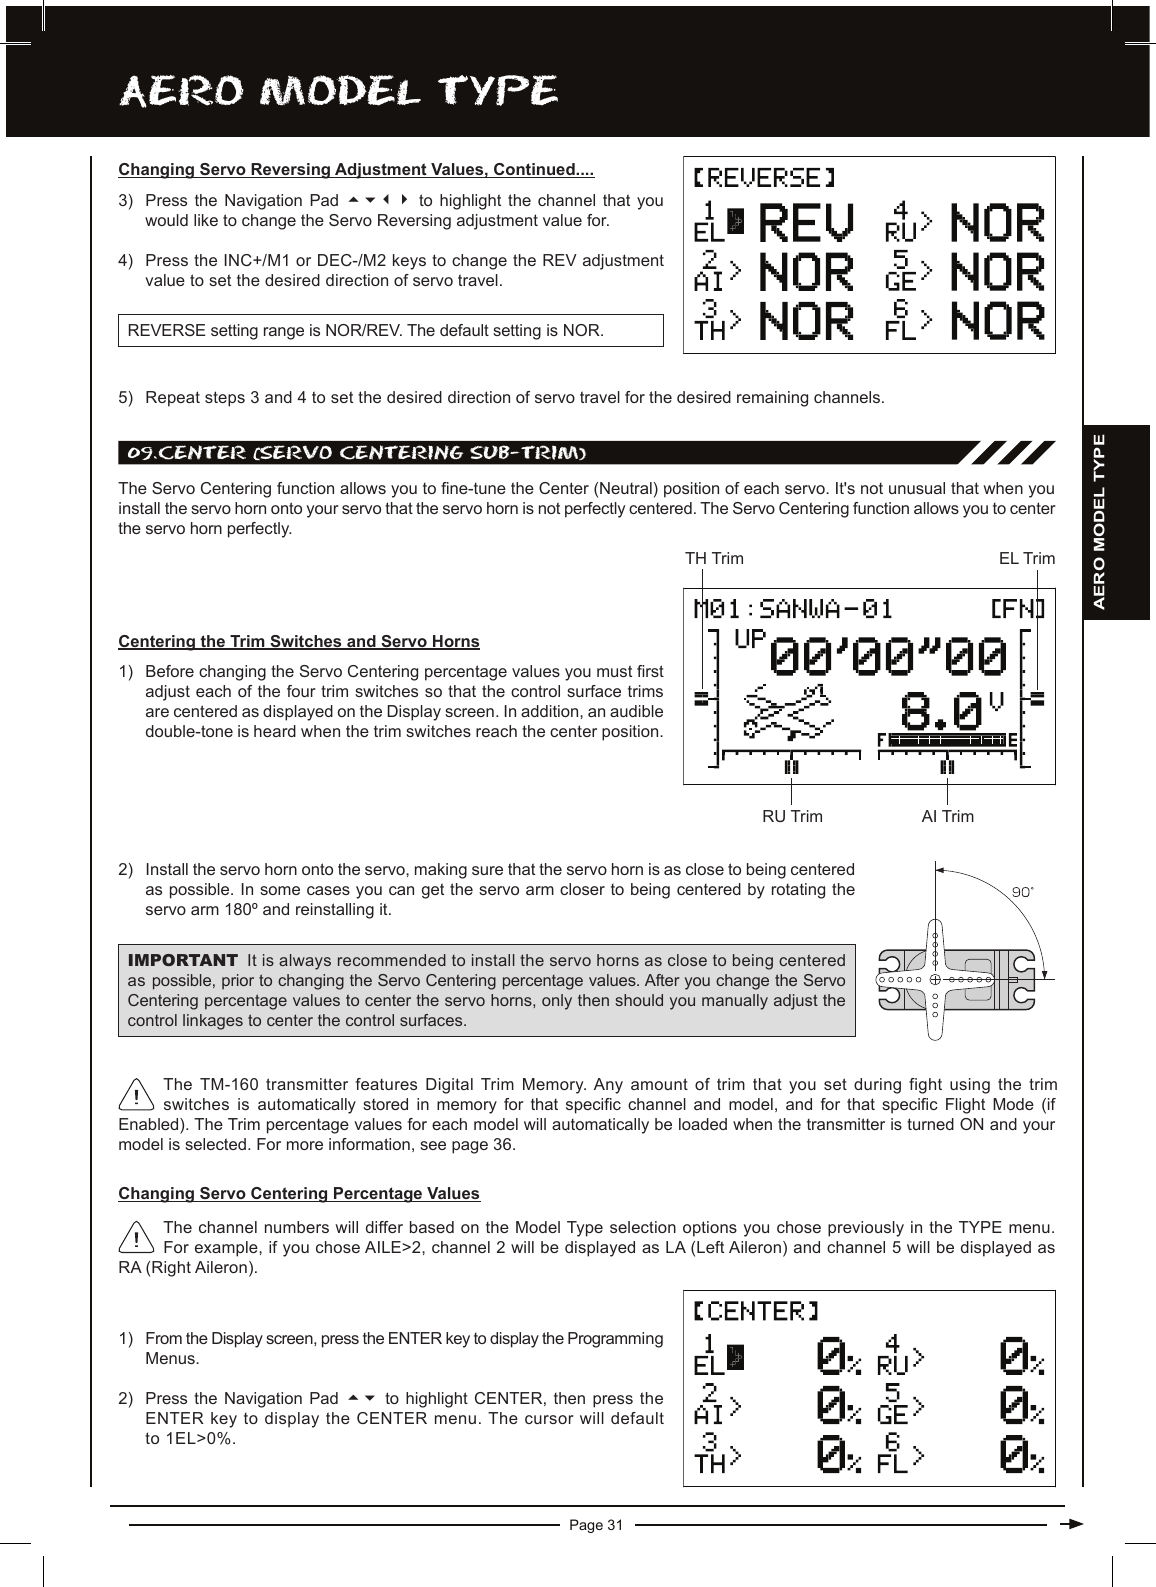 Page 31aERO MODEL TyPEChanging Servo Reversing Adjustment Values, Continued....3) Press the  Navigation  Pad  5634 to highlight the  channel  that  you would like to change the Servo Reversing adjustment value for.4) Press the INC+/M1 or DEC-/M2 keys to change the REV adjustment value to set the desired direction of servo travel.REVERSE setting range is NOR/REV. The default setting is NOR.5) Repeat steps 3 and 4 to set the desired direction of servo travel for the desired remaining channels.09.cEnTER (SERvO cEnTERing SUB-TRiM)The Servo Centering function allows you to ne-tune the Center (Neutral) position of each servo. It&apos;s not unusual that when you install the servo horn onto your servo that the servo horn is not perfectly centered. The Servo Centering function allows you to center the servo horn perfectly.1) From the Display screen, press the ENTER key to display the Programming Menus.2) Press the Navigation Pad  56 to  highlight  CENTER,  then  press  the ENTER key to display the CENTER menu. The cursor will default to 1EL&gt;0%.The channel numbers will differ based on the Model Type selection options you chose previously in the TYPE menu. For example, if you chose AILE&gt;2, channel 2 will be displayed as LA (Left Aileron) and channel 5 will be displayed as RA (Right Aileron).Centering the Trim Switches and Servo Horns1) Before changing the Servo Centering percentage values you must rst adjust each of the four trim switches so that the control surface trims are centered as displayed on the Display screen. In addition, an audible double-tone is heard when the trim switches reach the center position. The TM-160 transmitter features Digital Trim Memory. Any amount of trim that you set during fight using the trim switches is automatically  stored  in  memory  for  that  specic  channel  and  model,  and  for  that  specic  Flight  Mode  (if Enabled). The Trim percentage values for each model will automatically be loaded when the transmitter is turned ON and your model is selected. For more information, see page 36.2) Install the servo horn onto the servo, making sure that the servo horn is as close to being centered as possible. In some cases you can get the servo arm closer to being centered by rotating the servo arm 180º and reinstalling it.IMPORTANT It is always recommended to install the servo horns as close to being centered as possible, prior to changing the Servo Centering percentage values. After you change the Servo Centering percentage values to center the servo horns, only then should you manually adjust the control linkages to center the control surfaces.TH TrimRU TrimEL TrimAI TrimChanging Servo Centering Percentage ValuesAERO MODEL TYPE